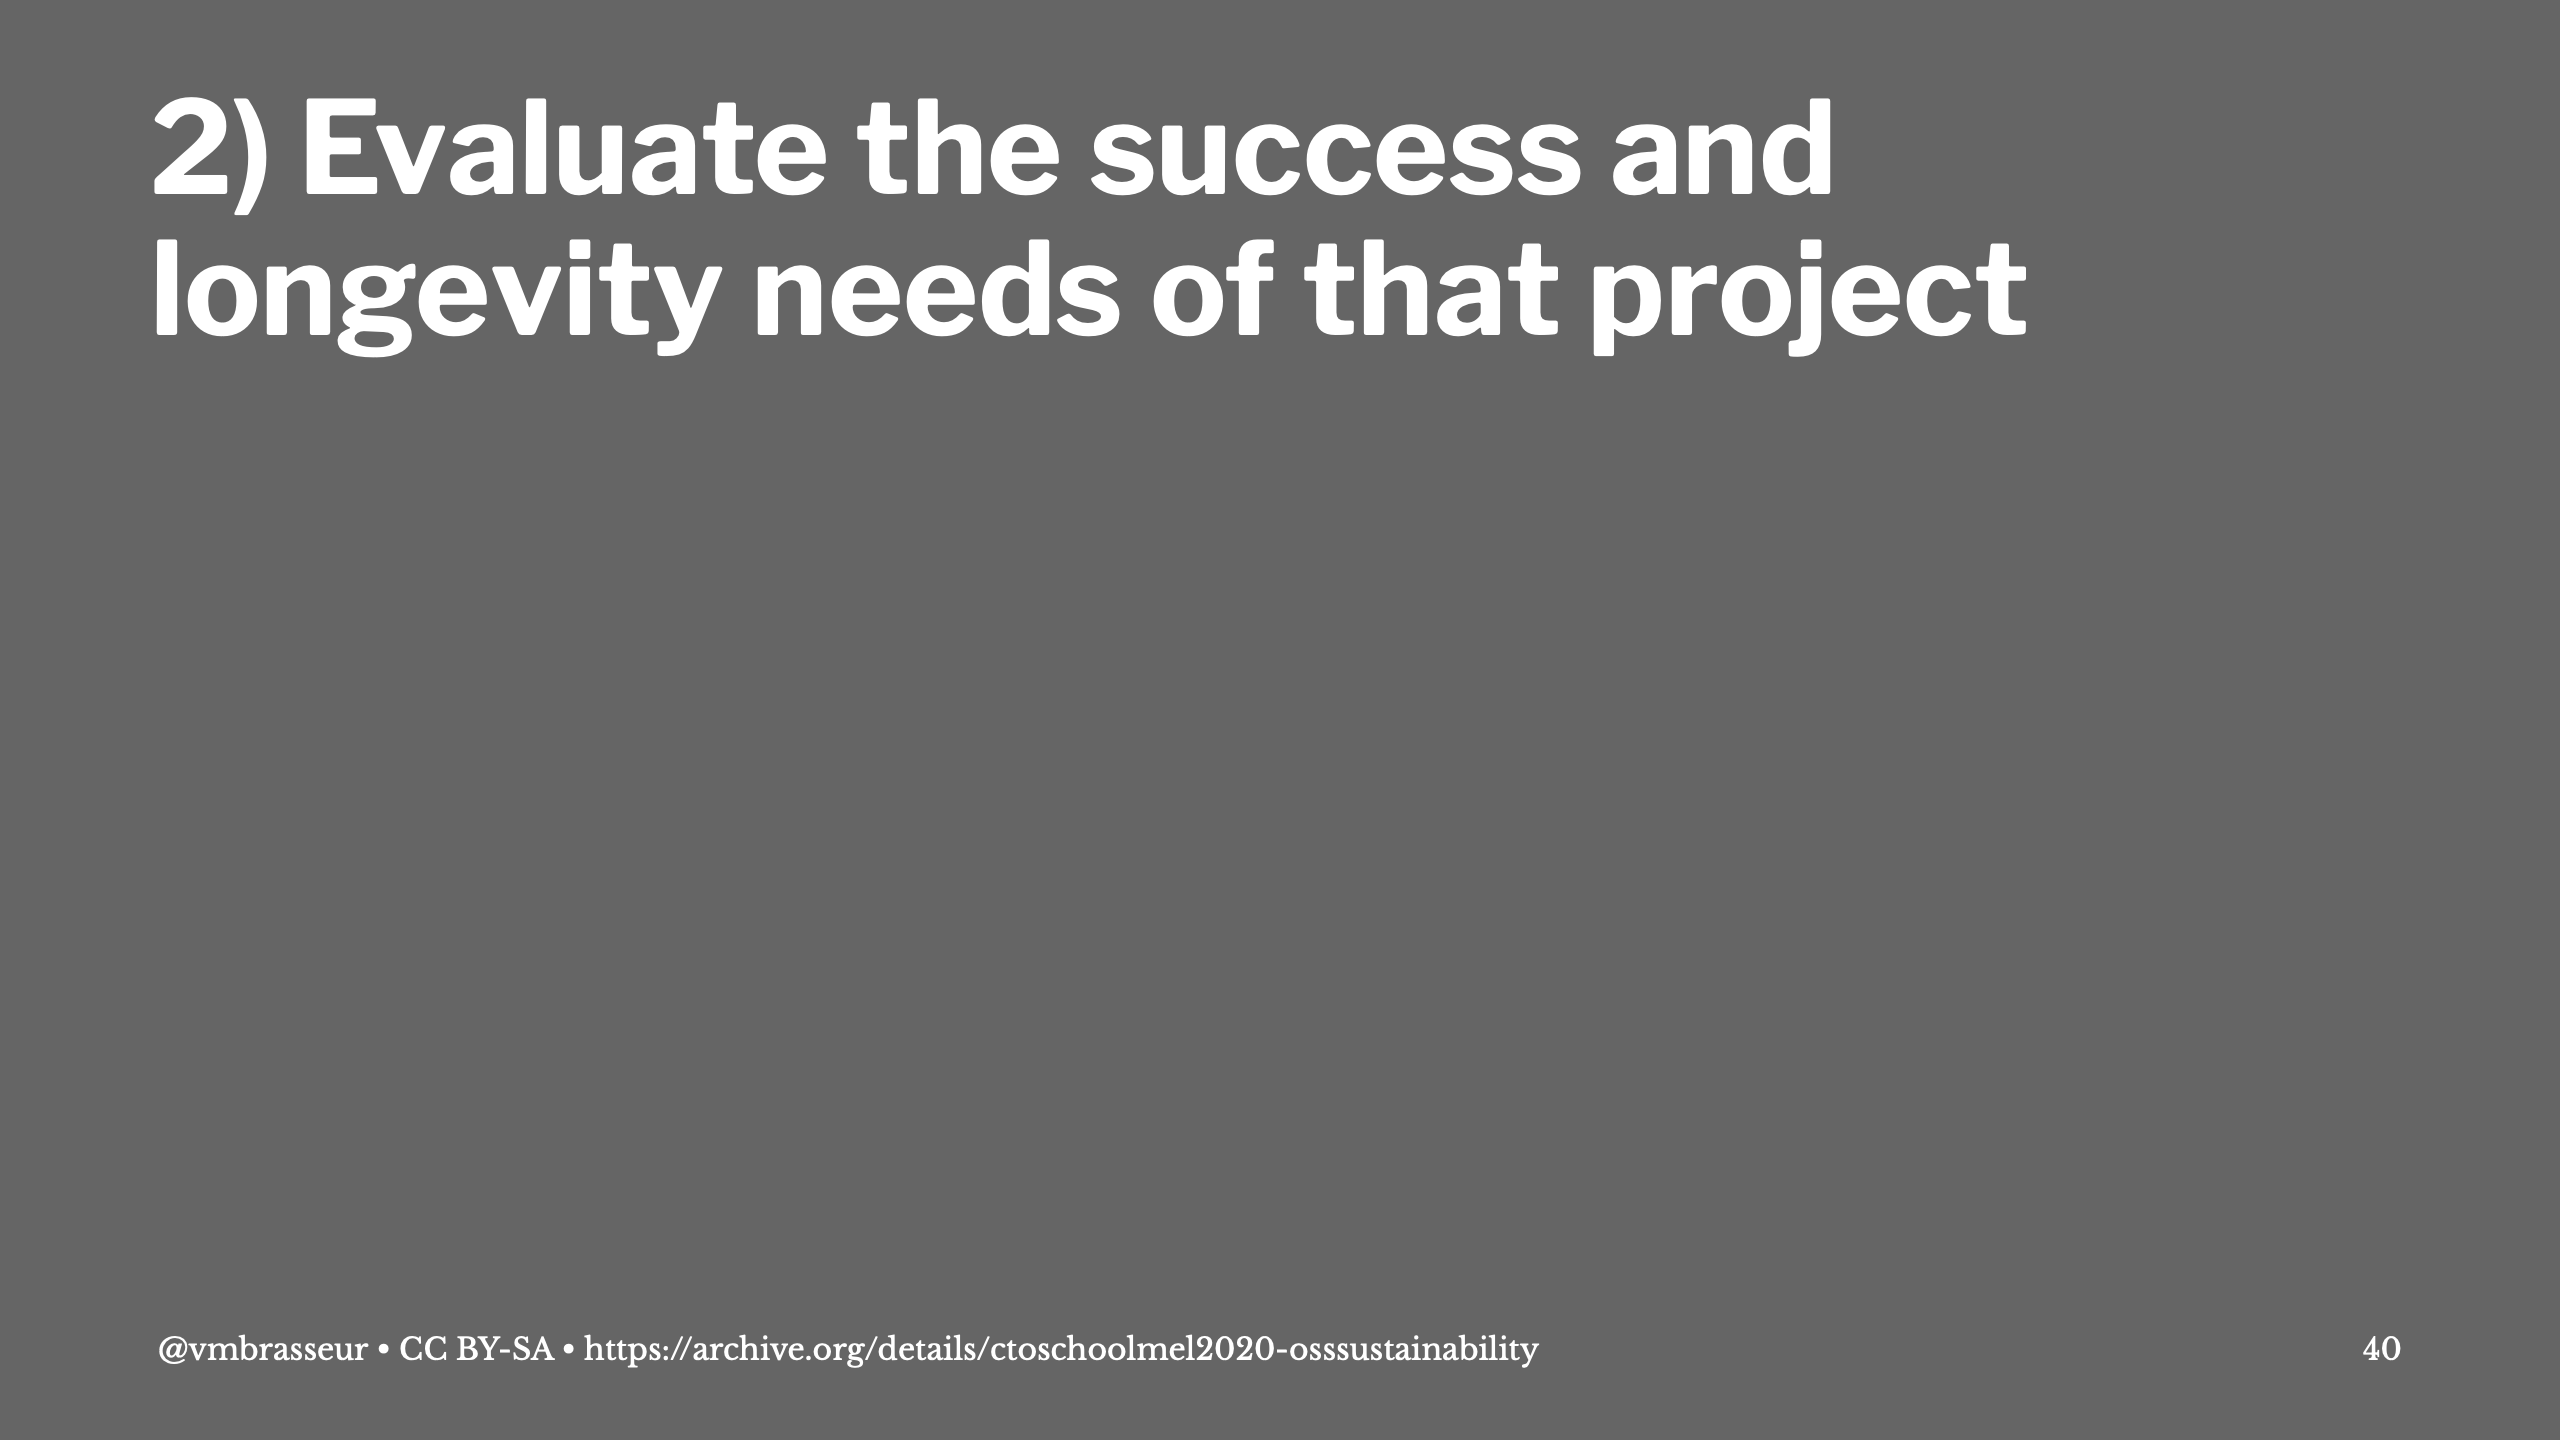 2) Evaluate the success and longevity needs of that project.